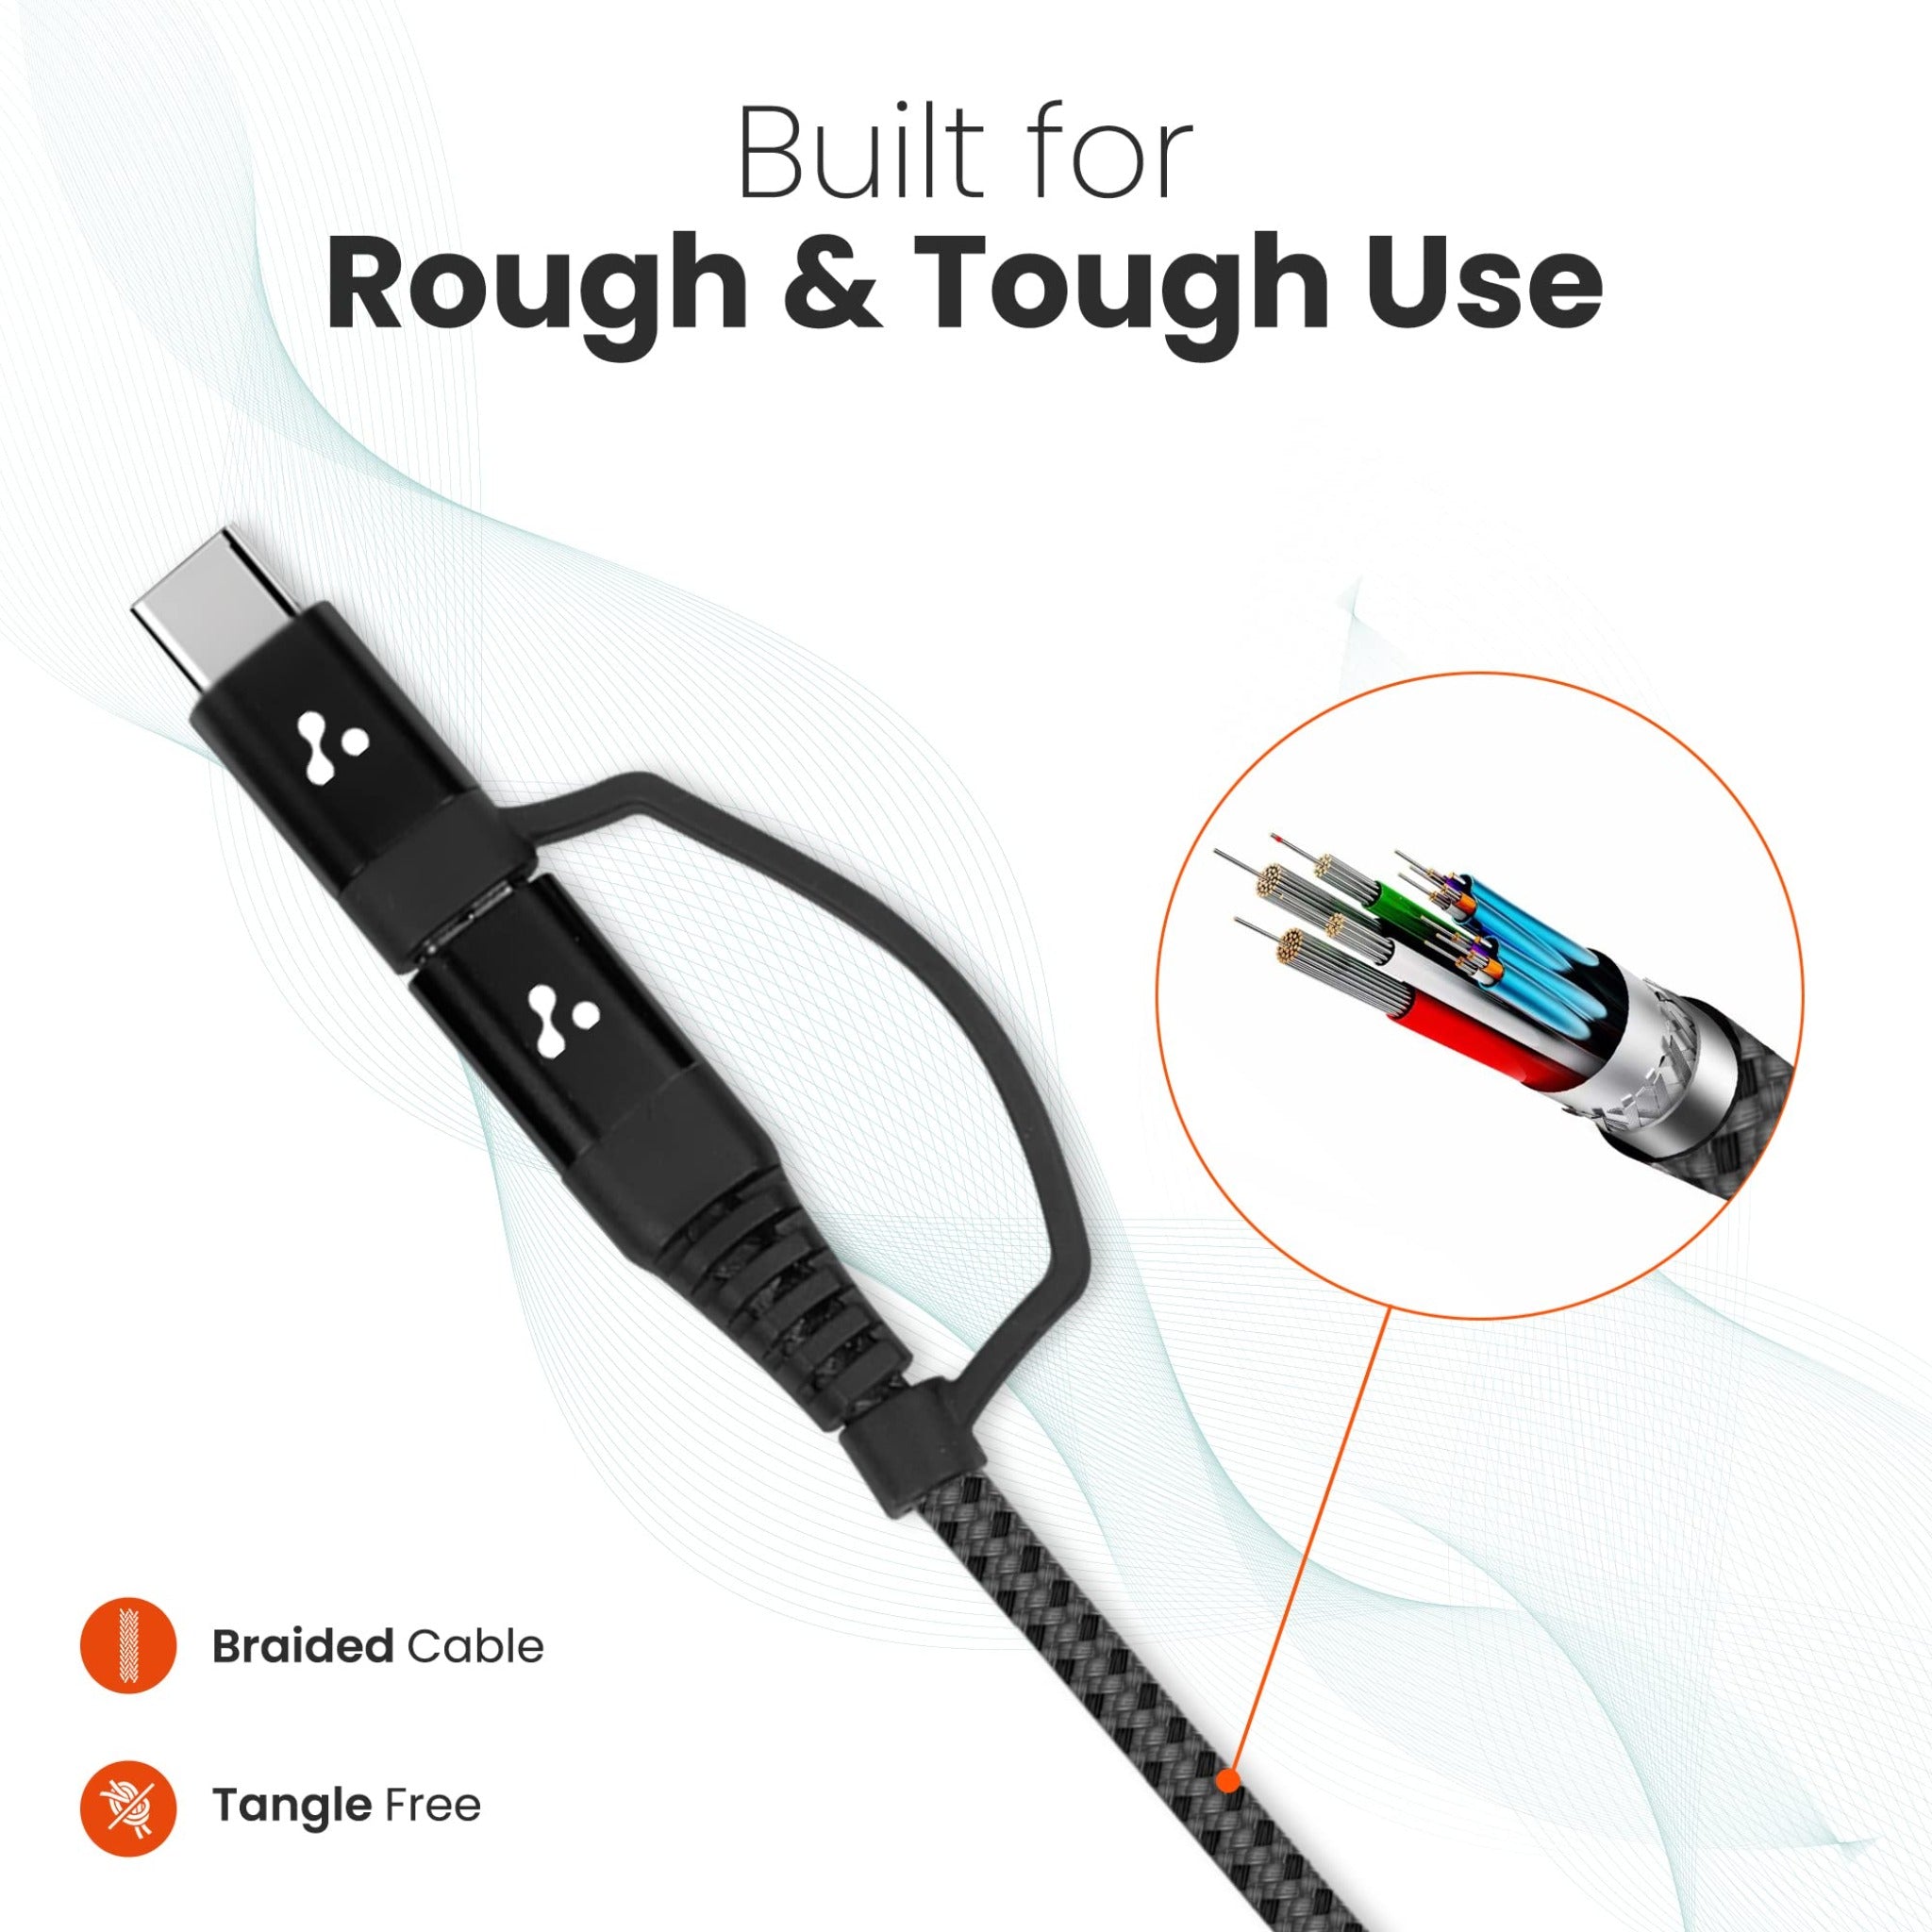 Ambrane Charge &amp; Sync, Aluminium Built, Type C connecter, 3A Fast Charging Output - Type c to Micro USB